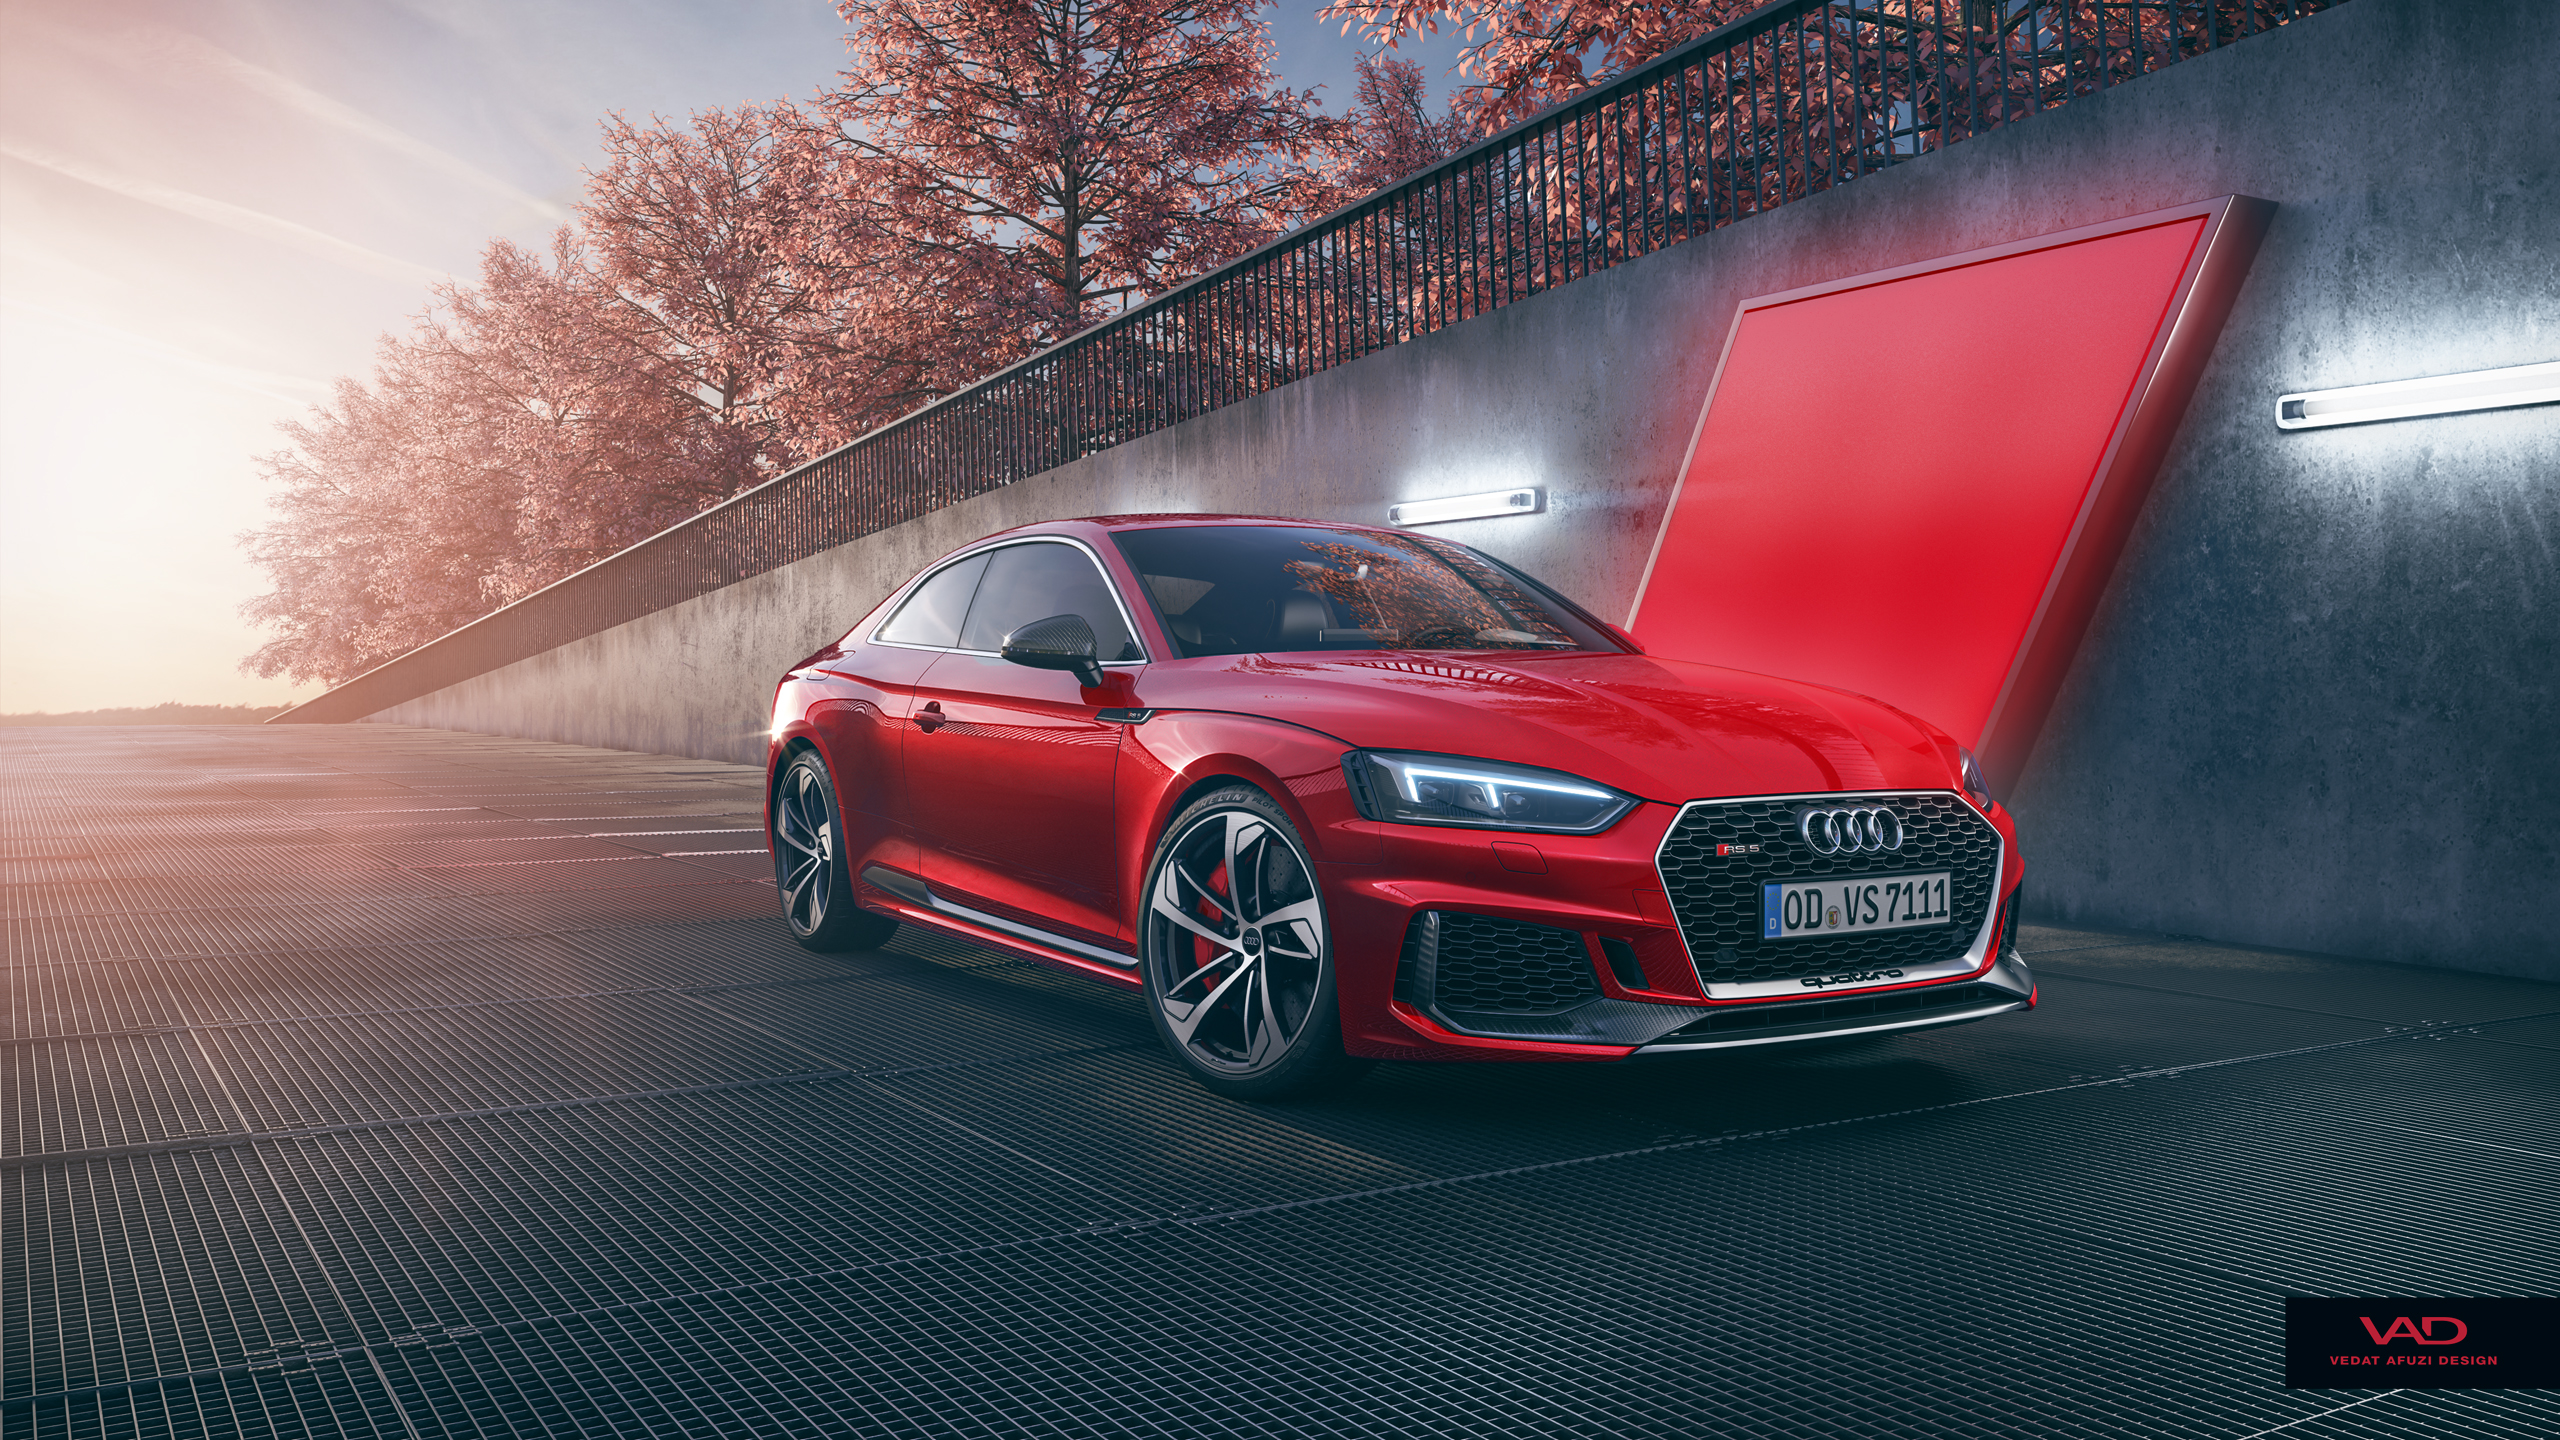 Audi RS5 Wallpapers and Background Images   stmednet